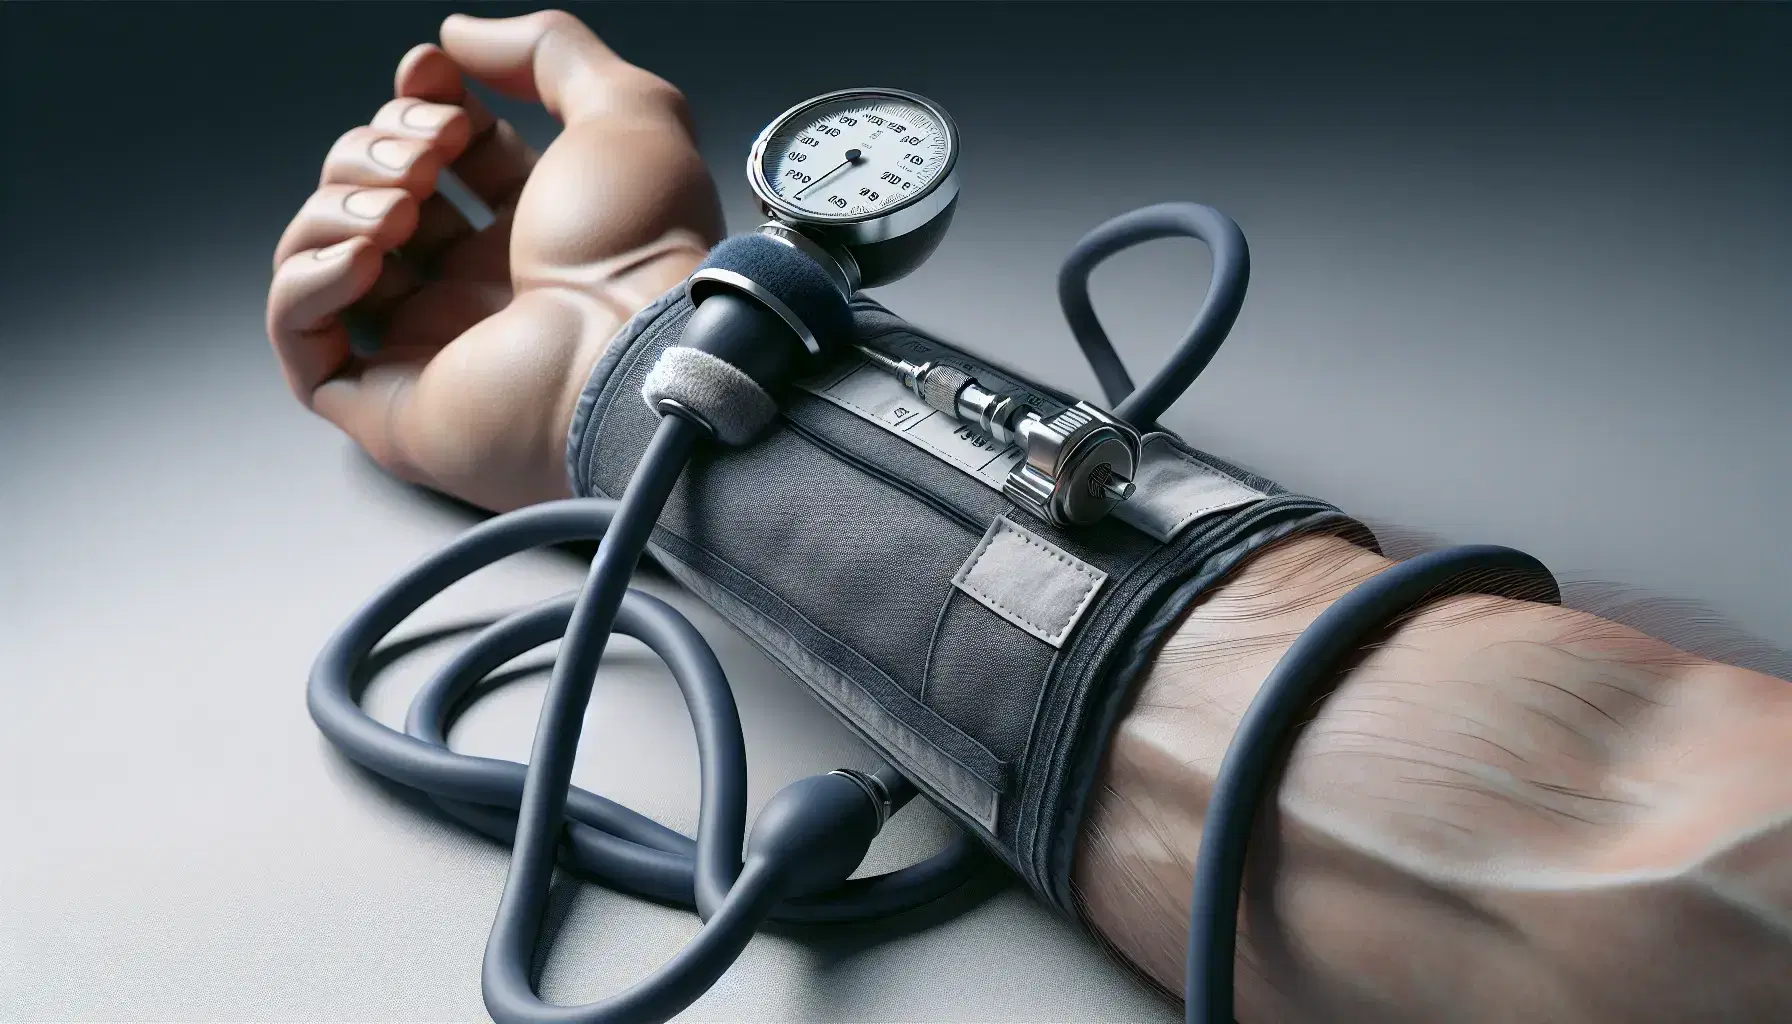 Blood pressure measurement with sphygmomanometer wrapped on adult arm, blurred clinical background, navy blue and metallic gray tone.